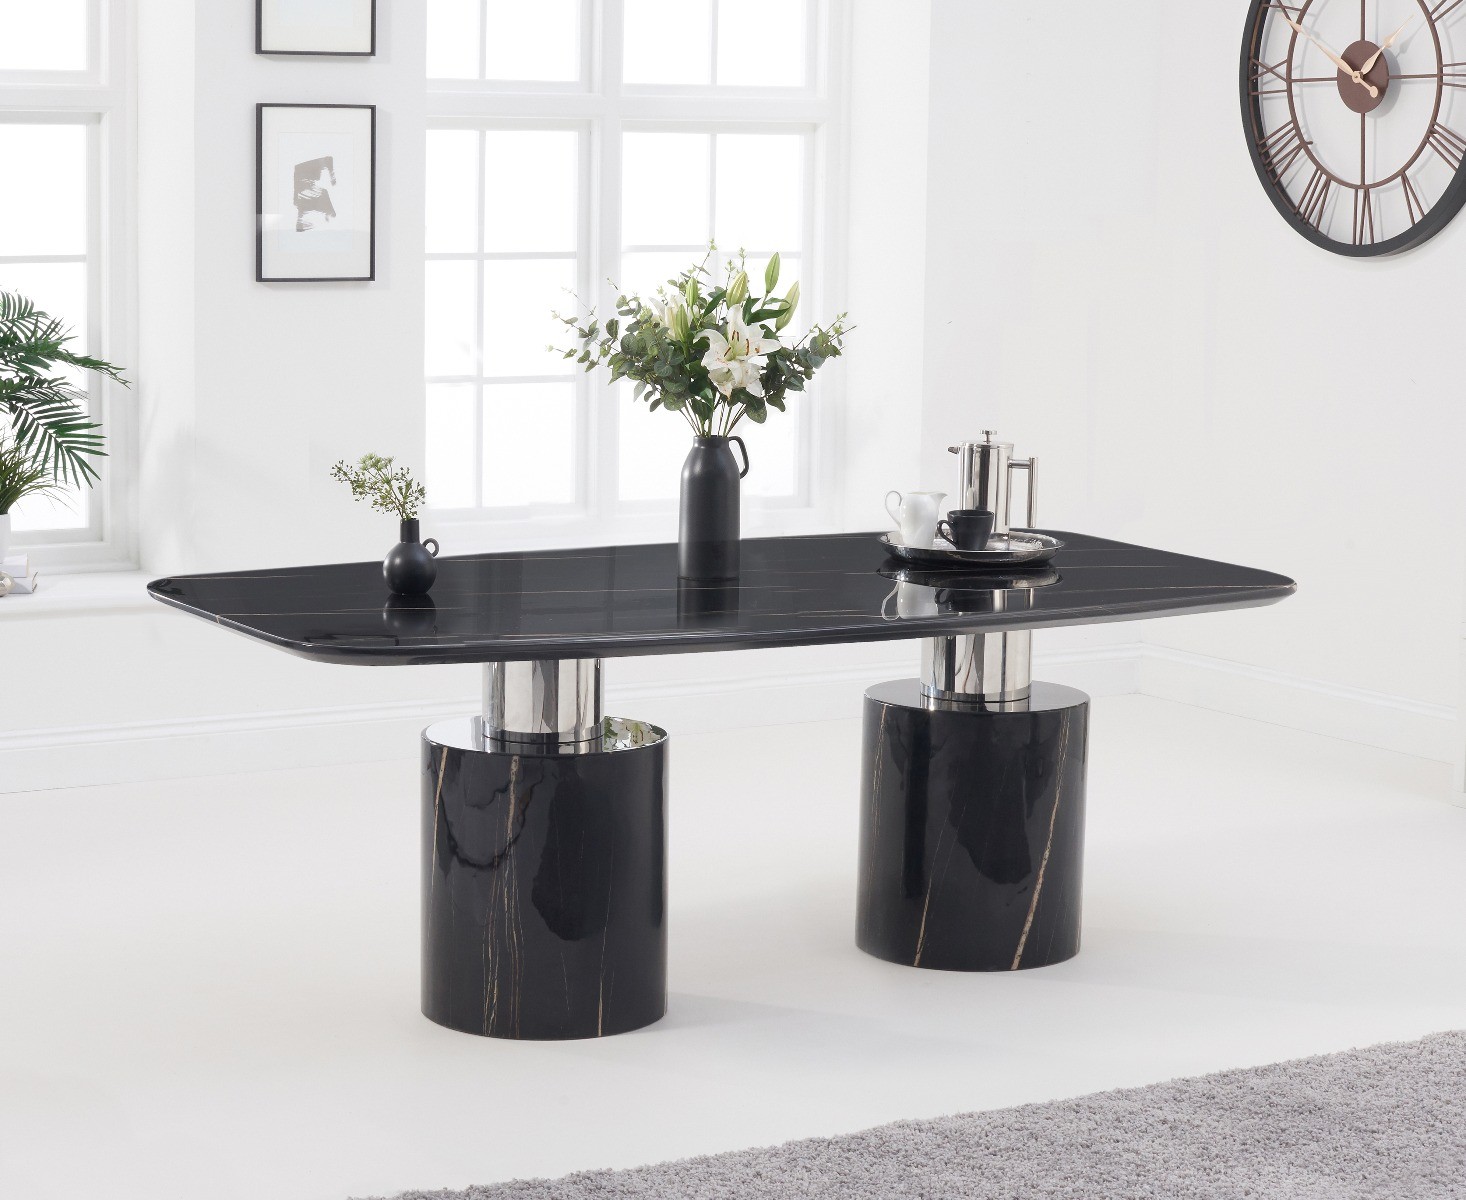 Photo 1 of Antonio 180cm black marble dining table with 8 white aldo chairs